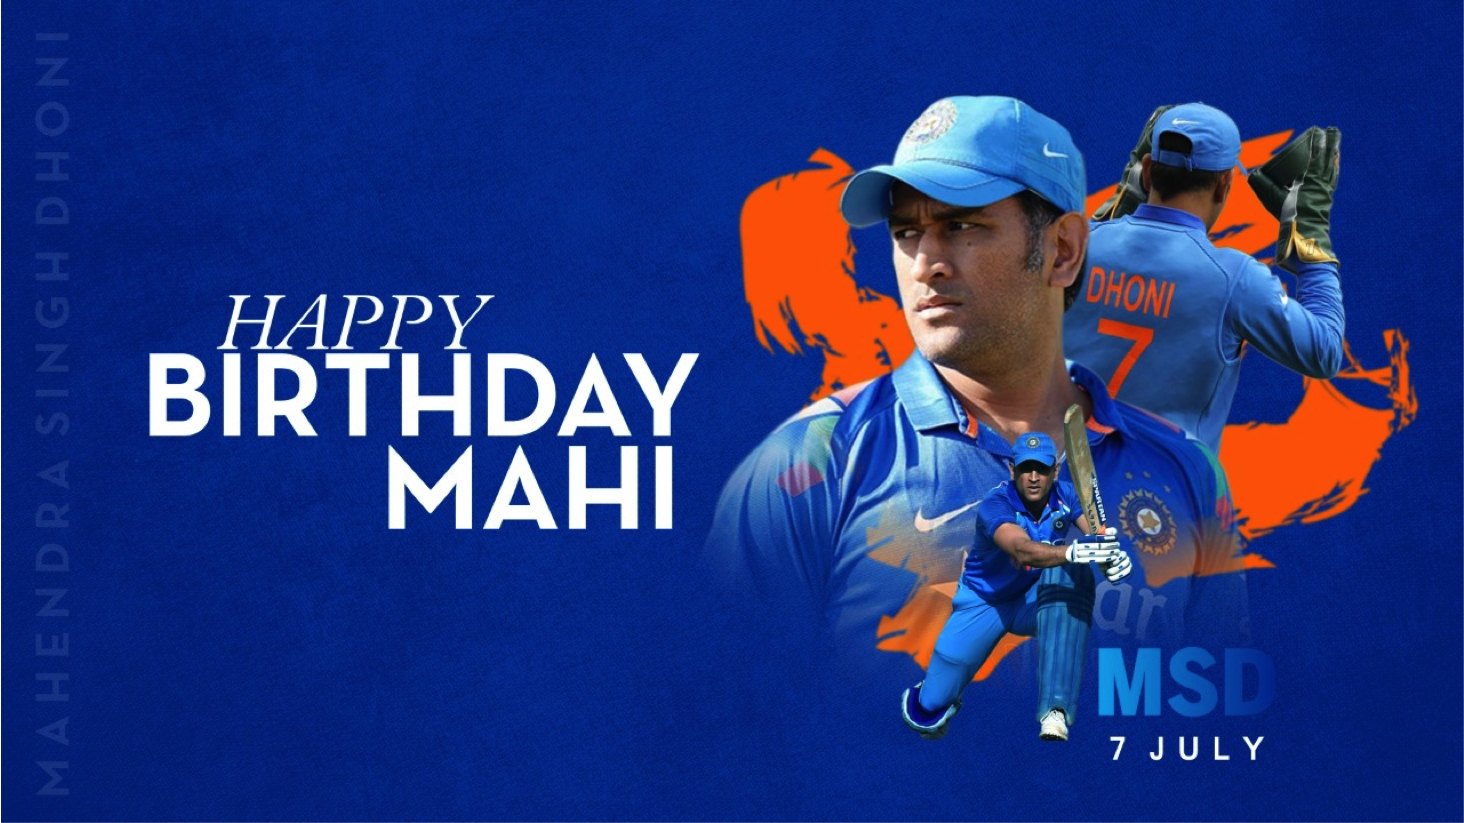 Ms Dhoni: An appreciation post on his birthday...